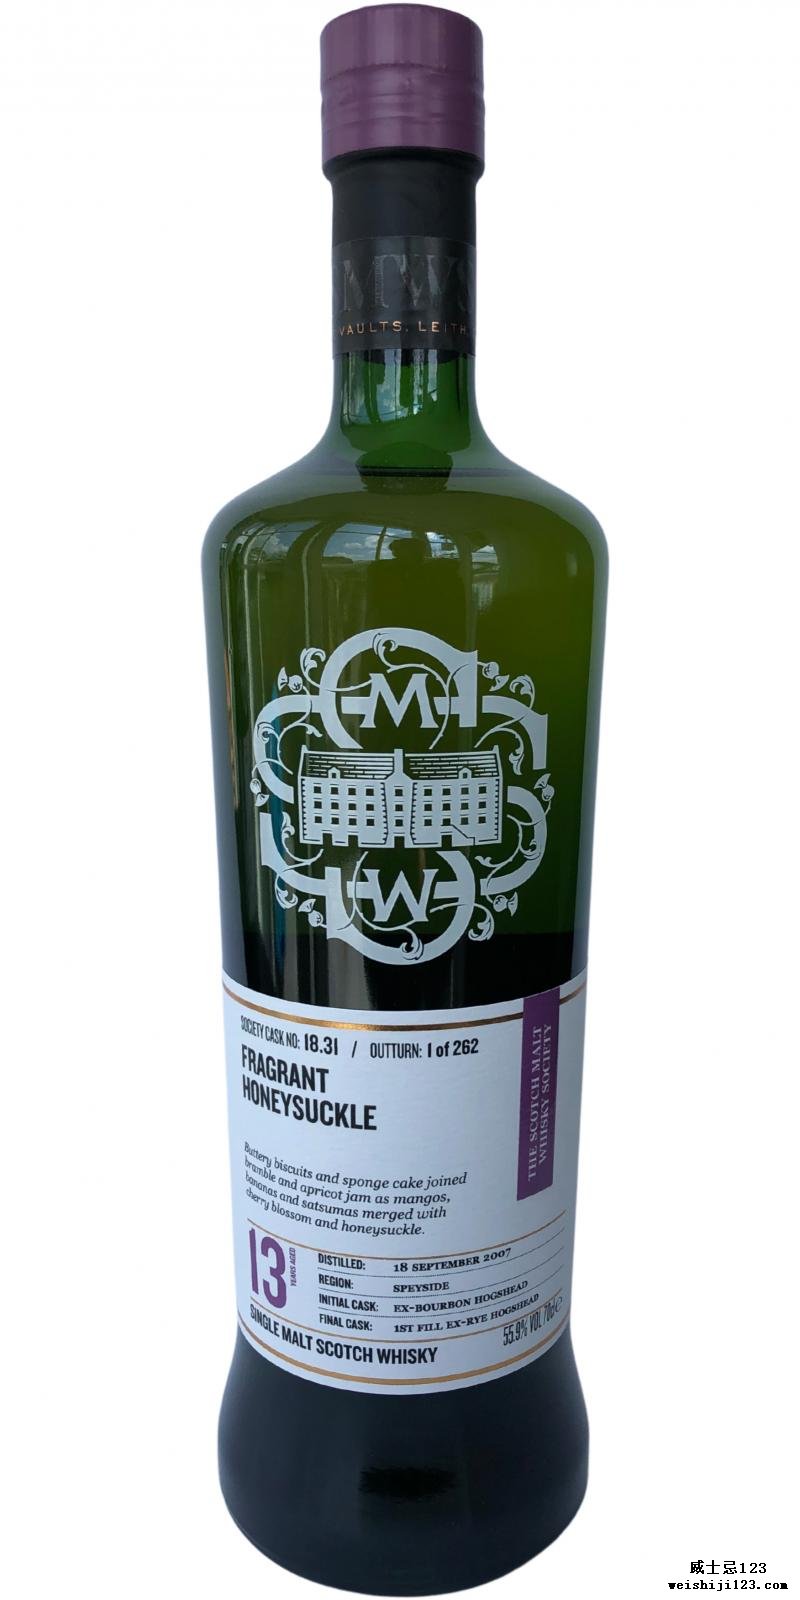 Inchgower 2007 SMWS 18.31